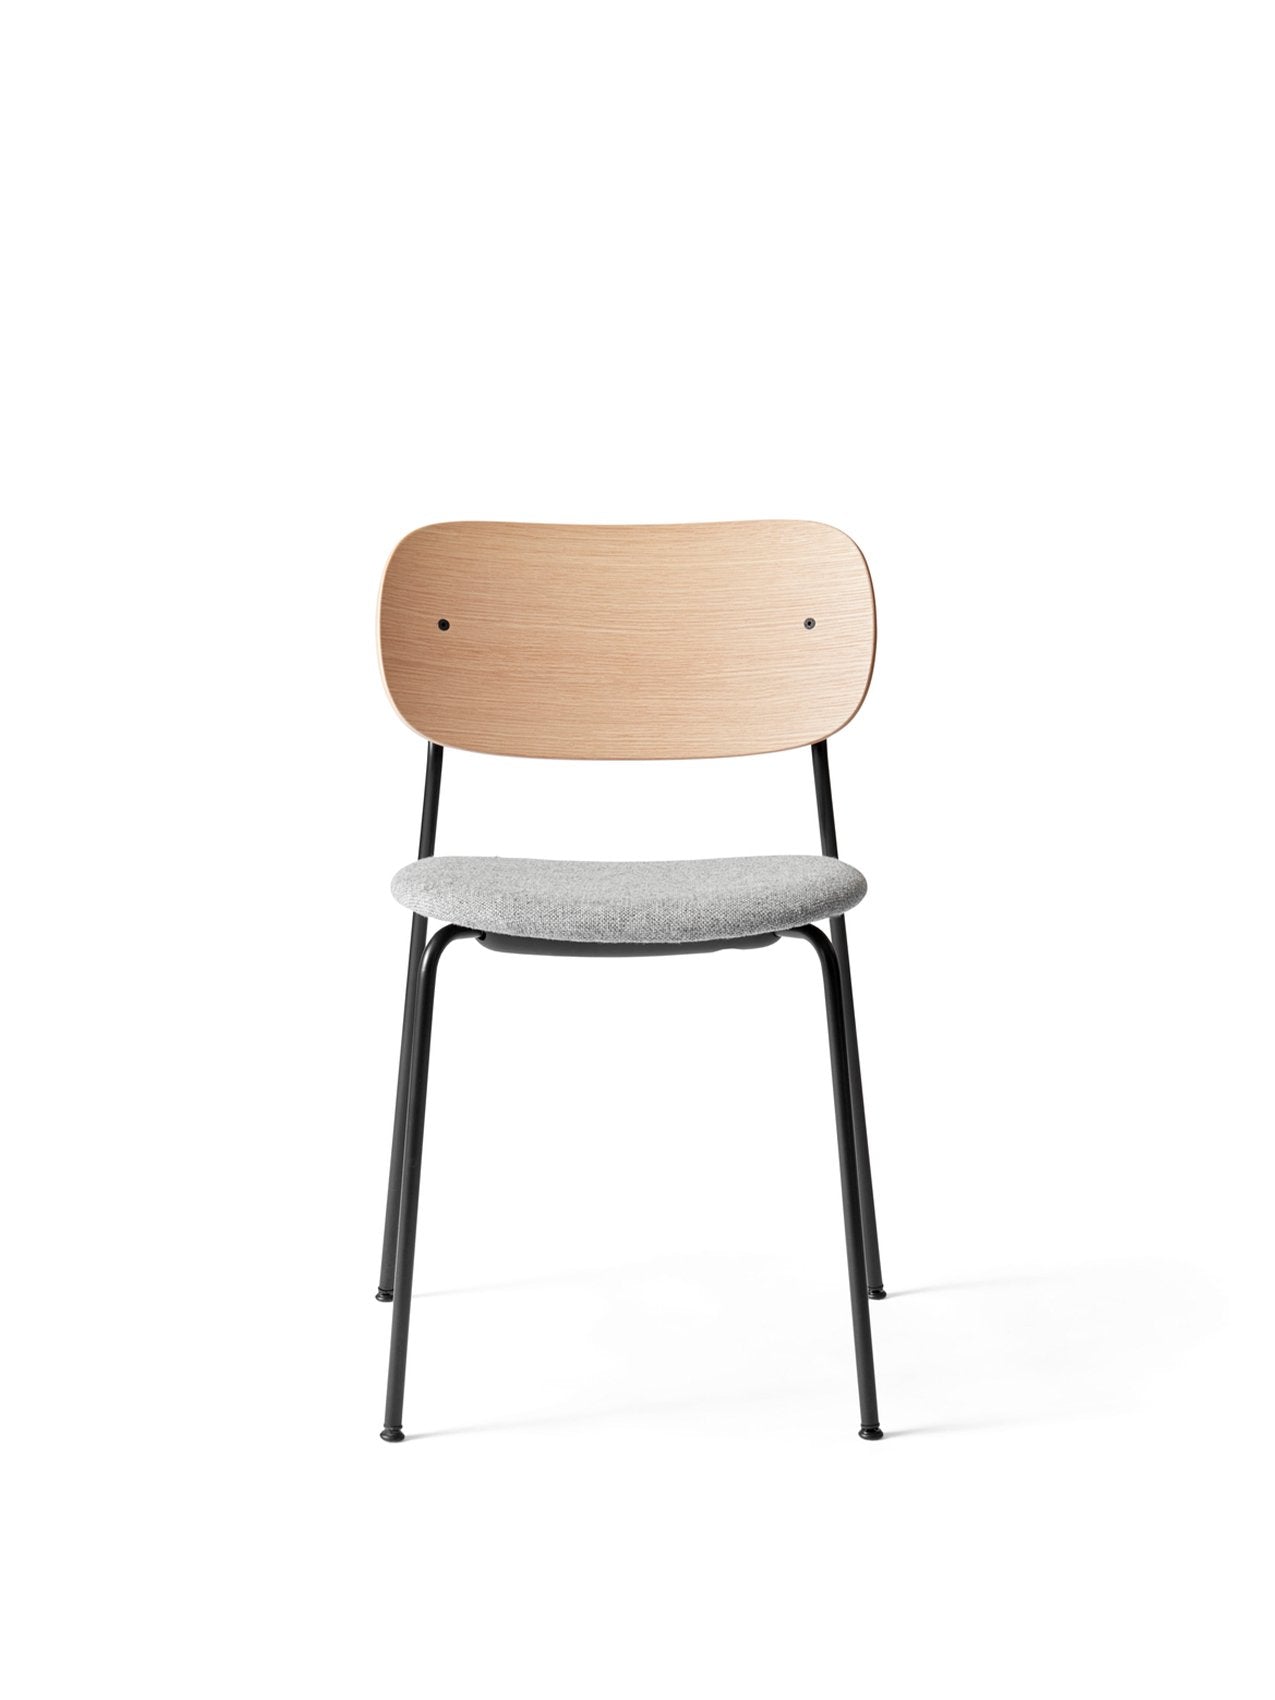 Co Chair, Upholstered-Chair-Norm Architects-menu-minimalist-modern-danish-design-home-decor